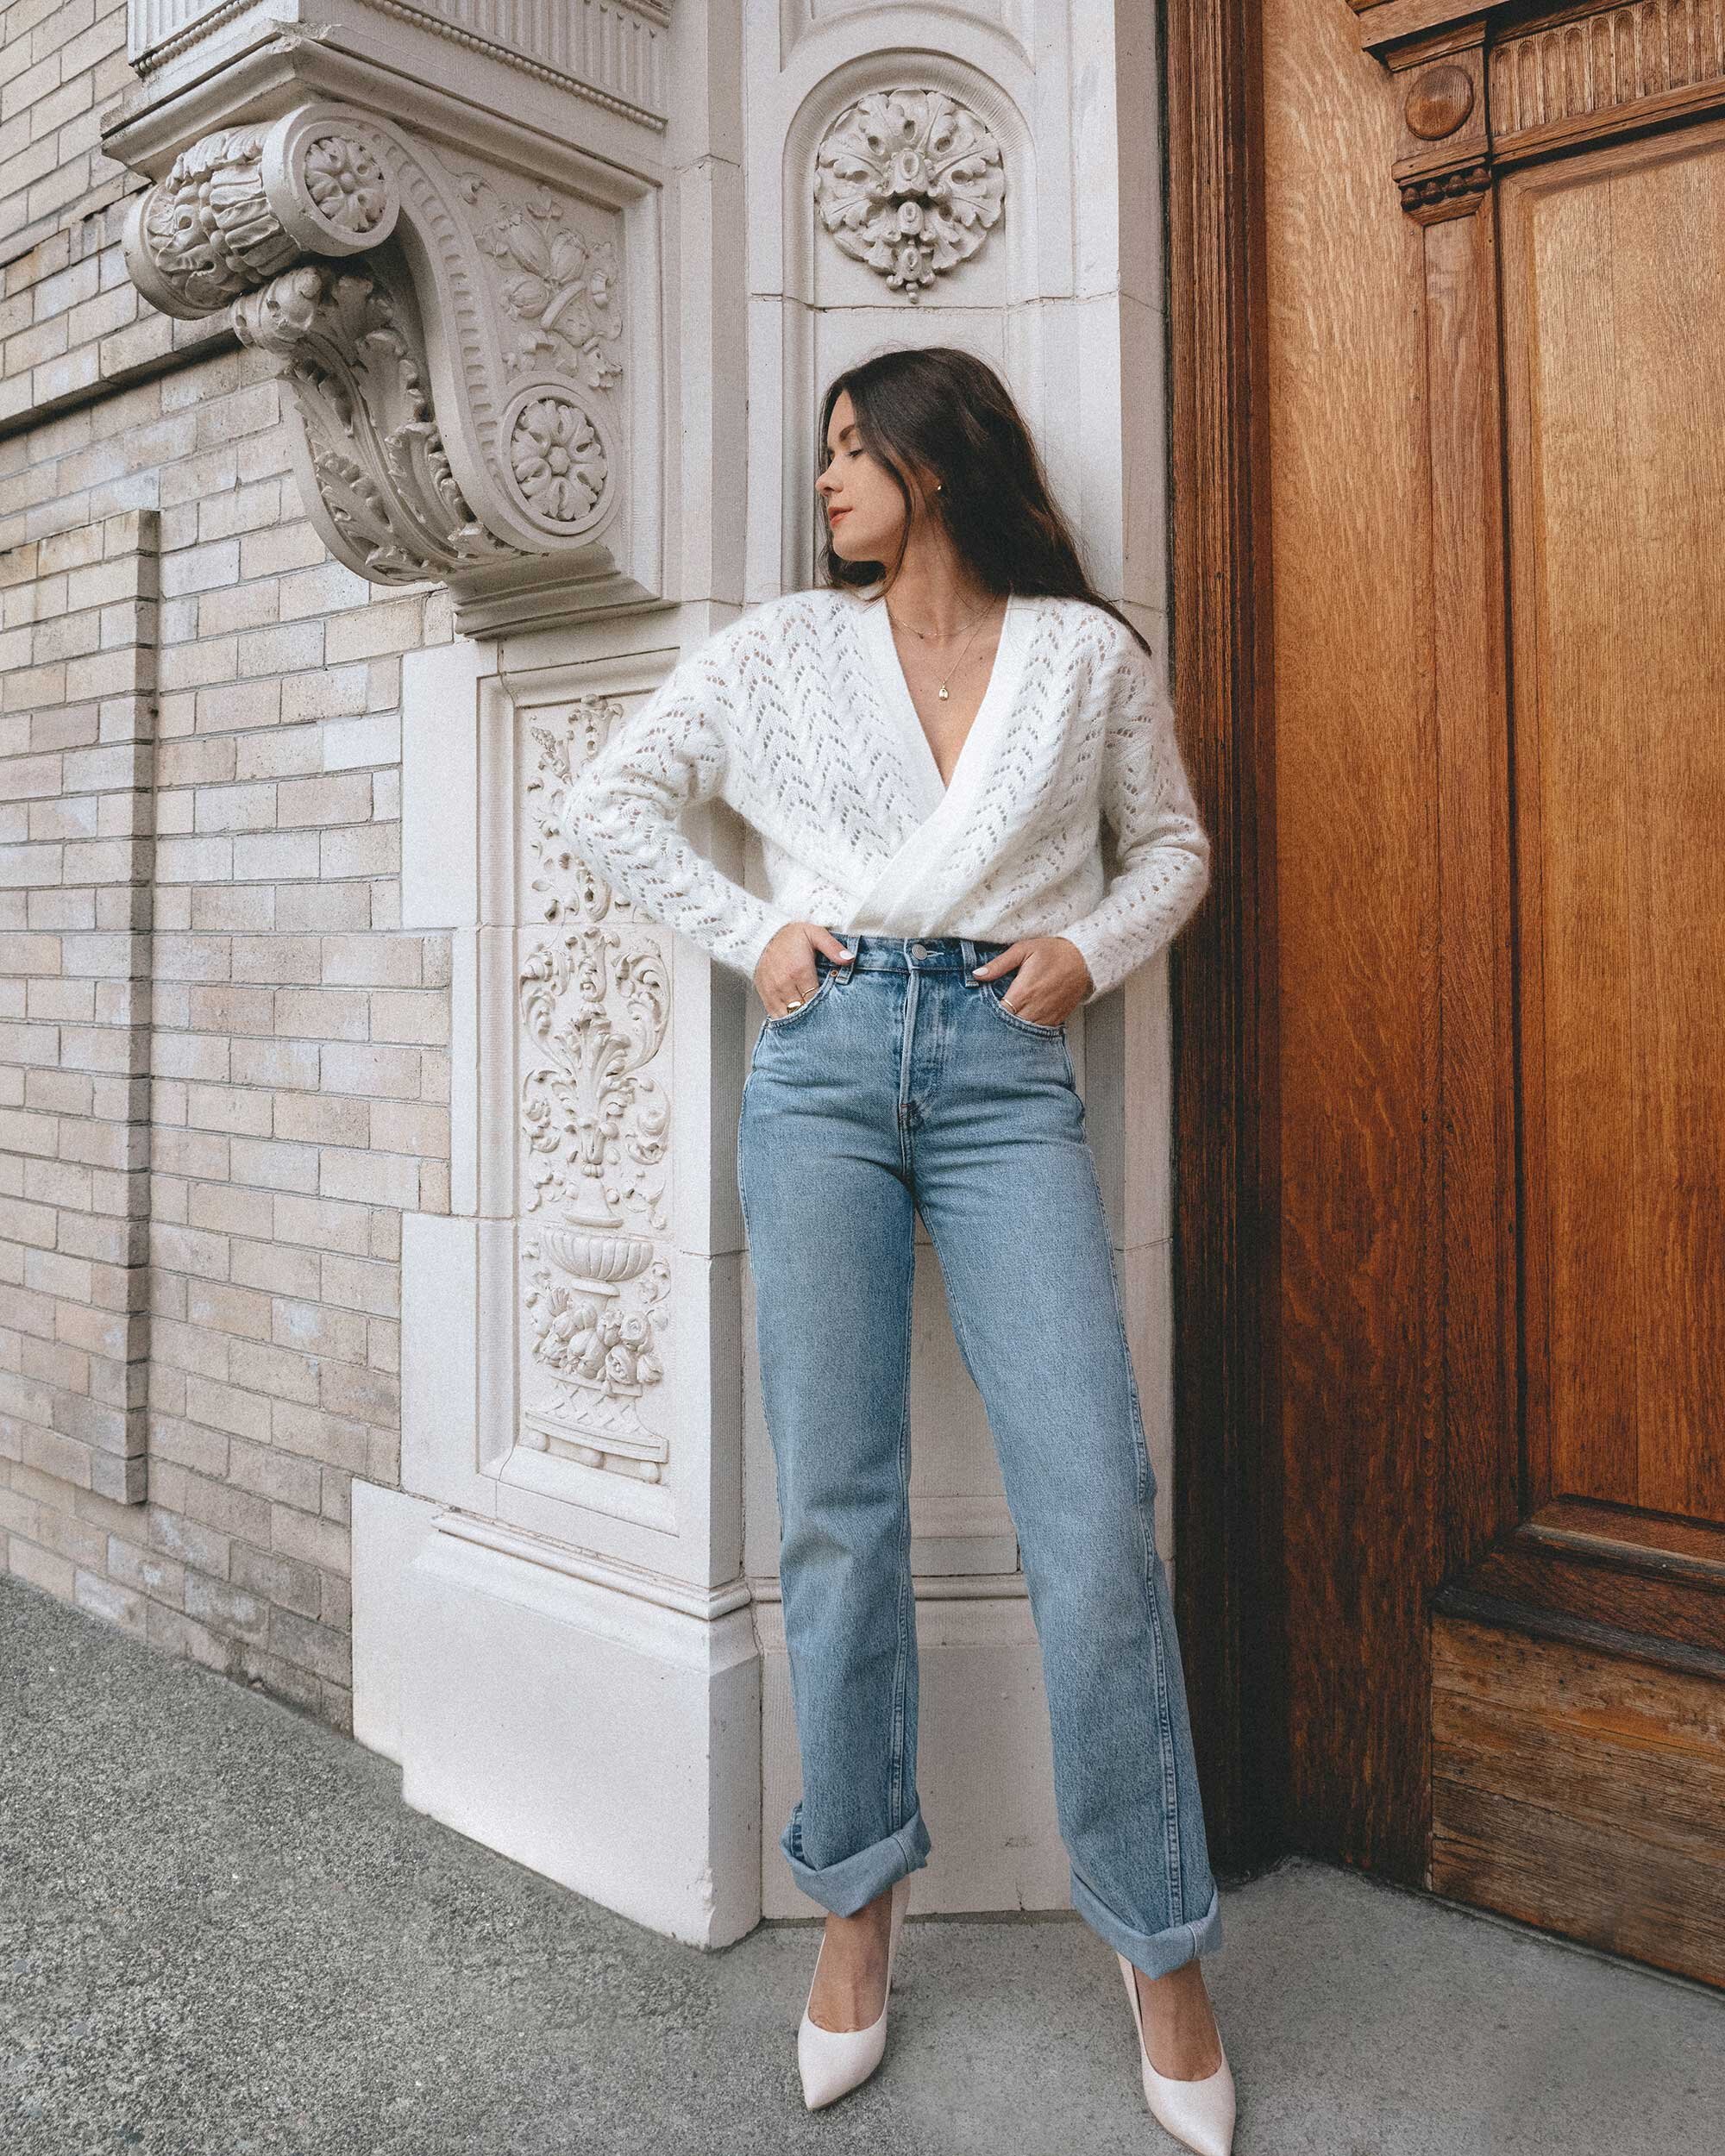 Easy winter outfit: sweater and jeans. Sarah Butler of @sarahchristine wearing & Other Stories Straight High Waist Jeans, Sezane Long-sleeved wool and mohair cardigan, pointy toe white pump. -1.jpg